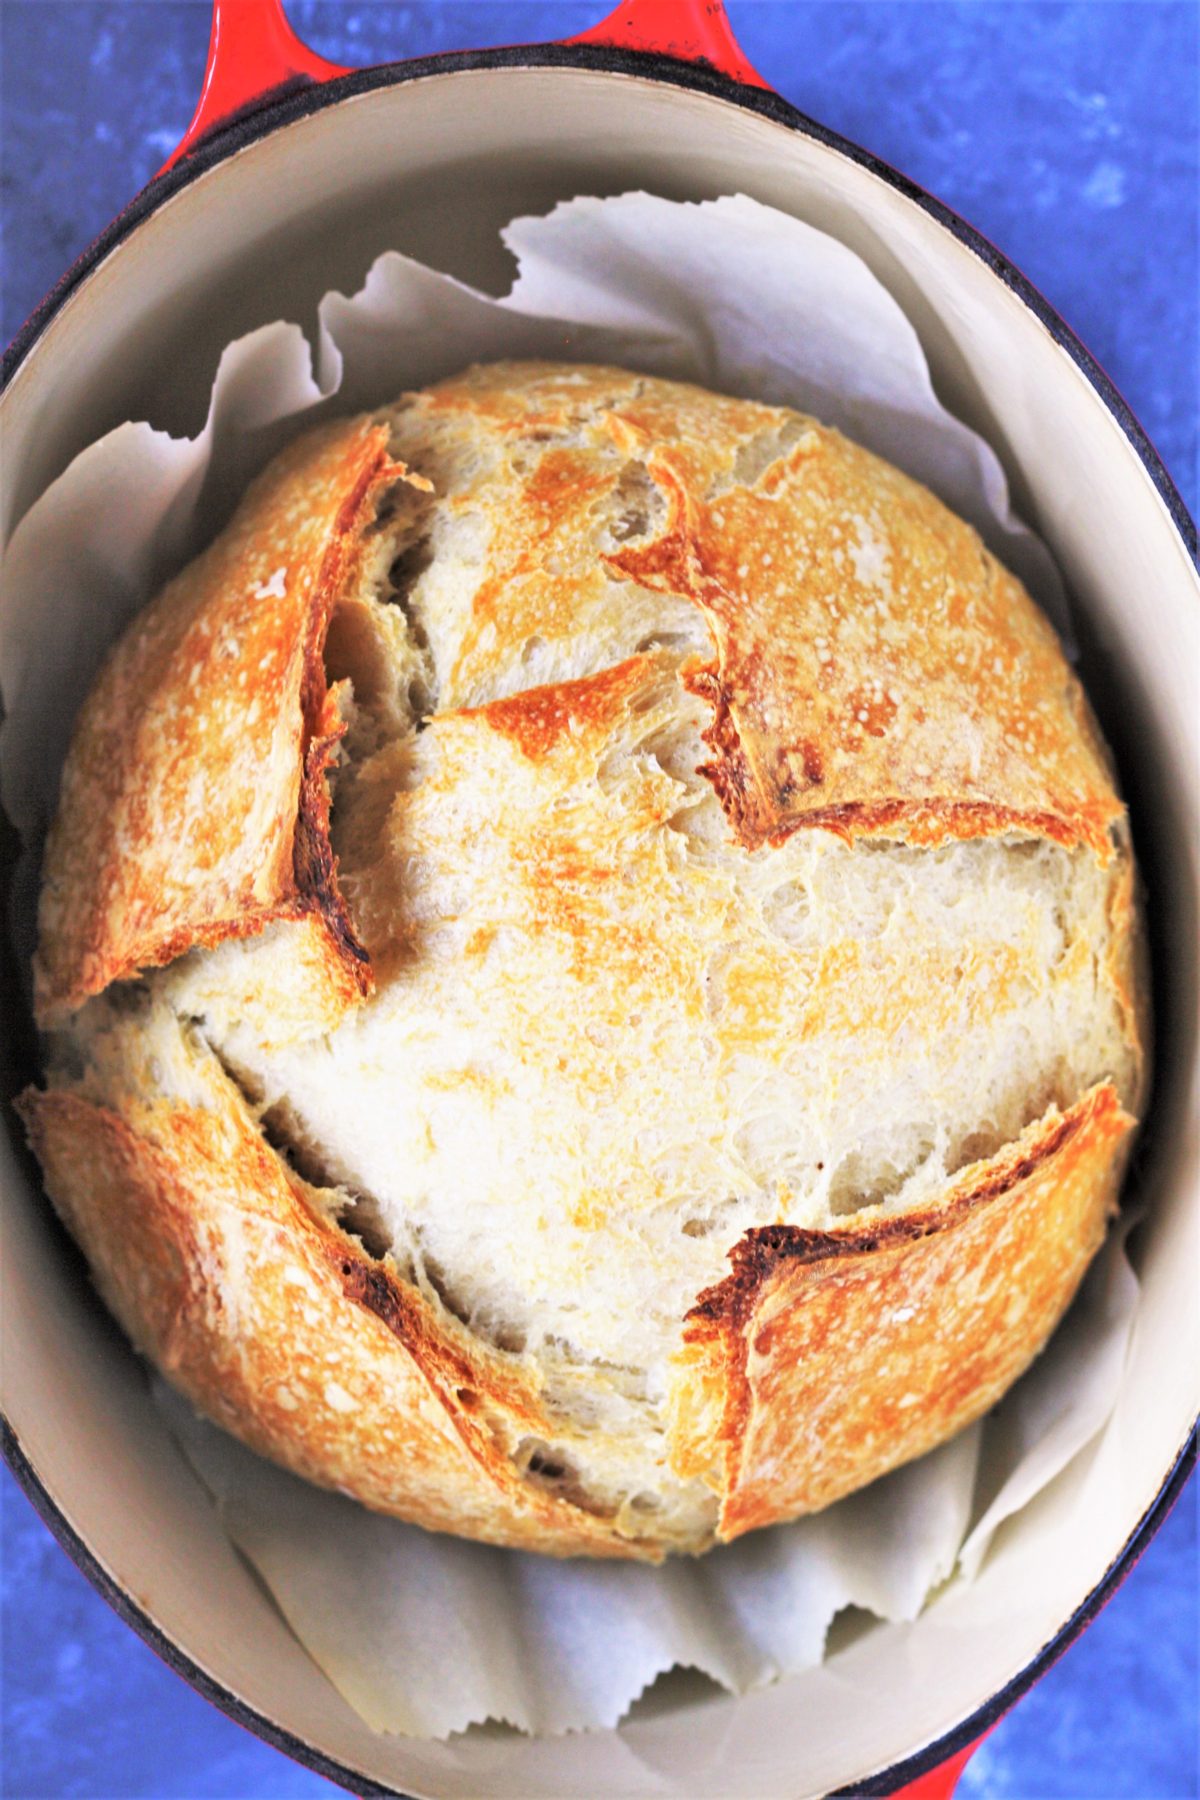 No Knead Crusty Dutch Oven Bread - Easy, Only Four Ingredients